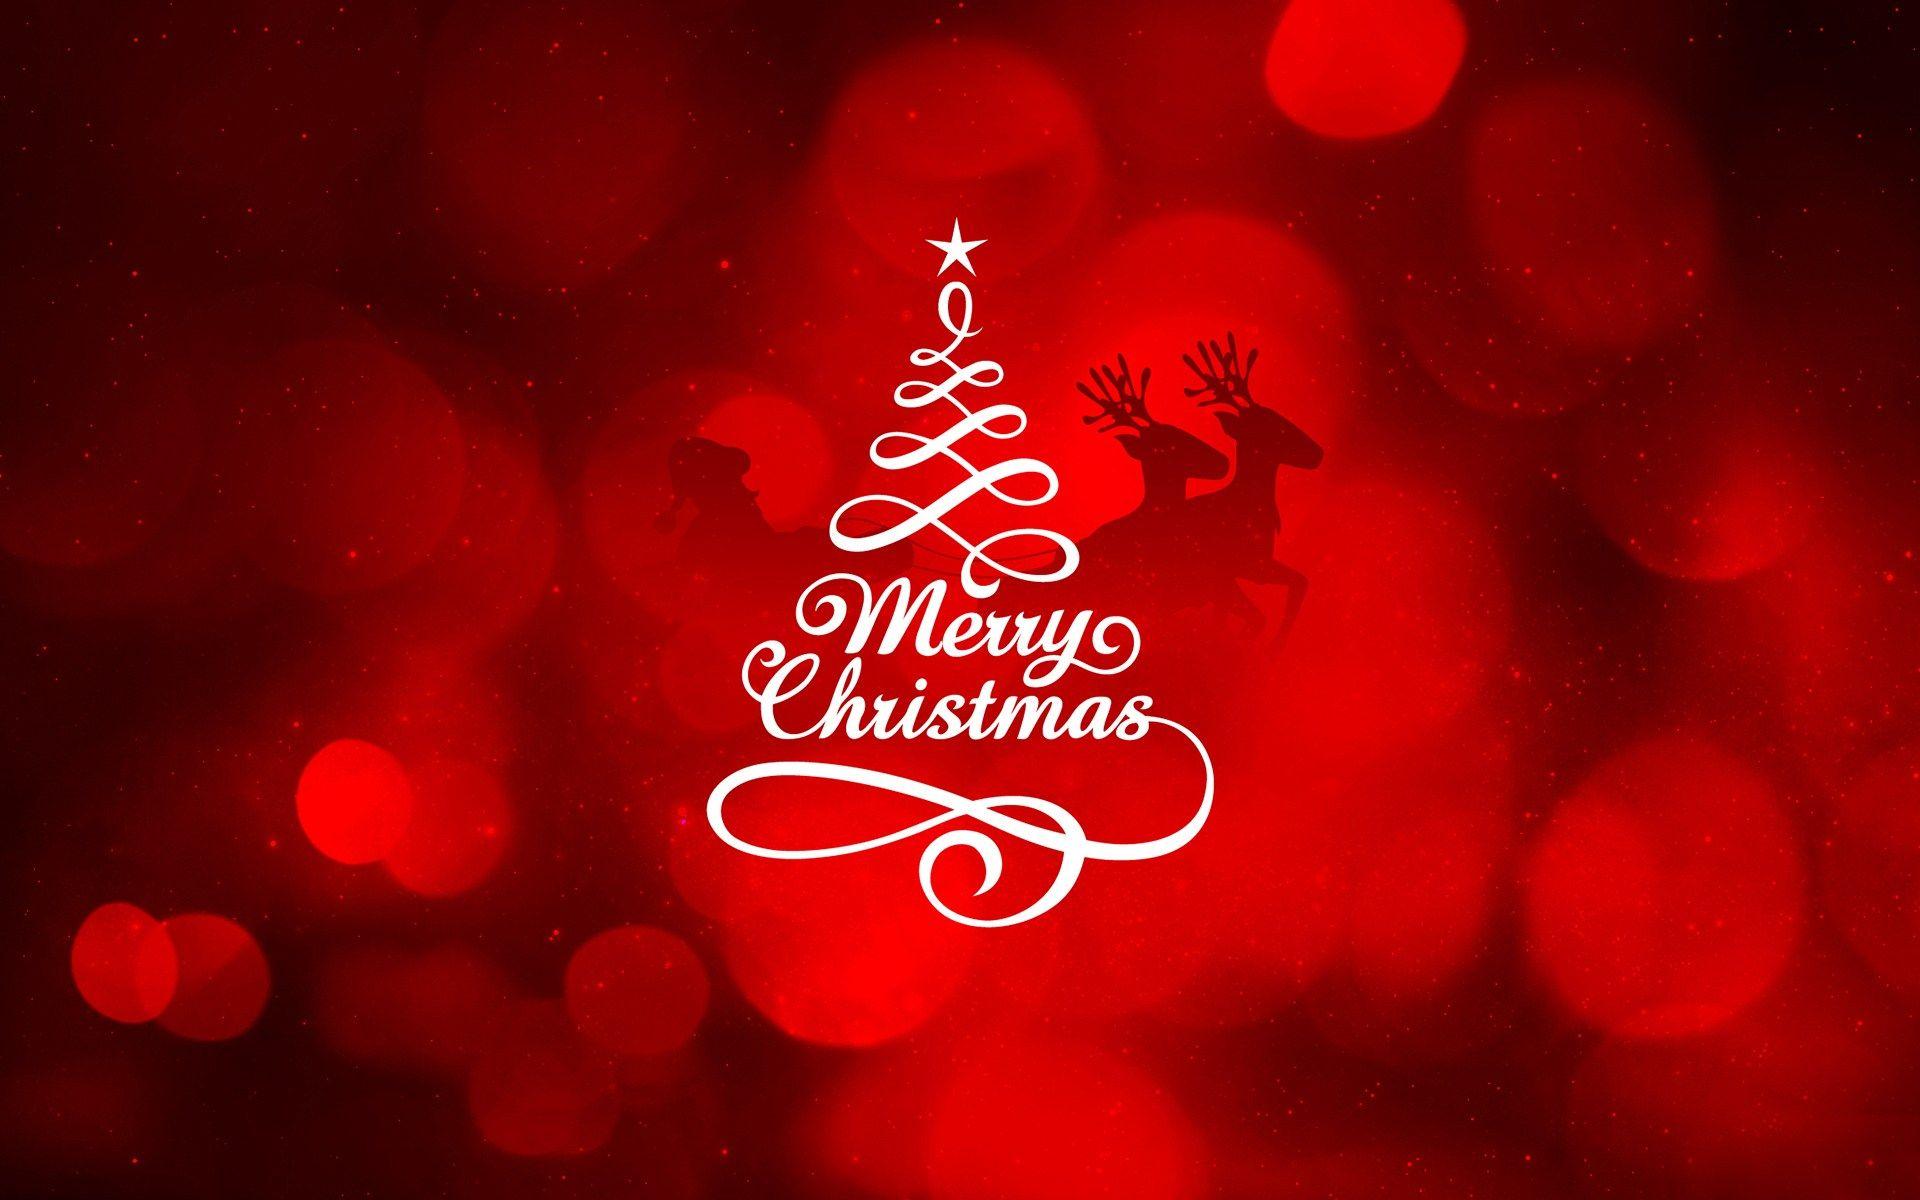 Beautiful Merry Christmas Image and Wallpaper